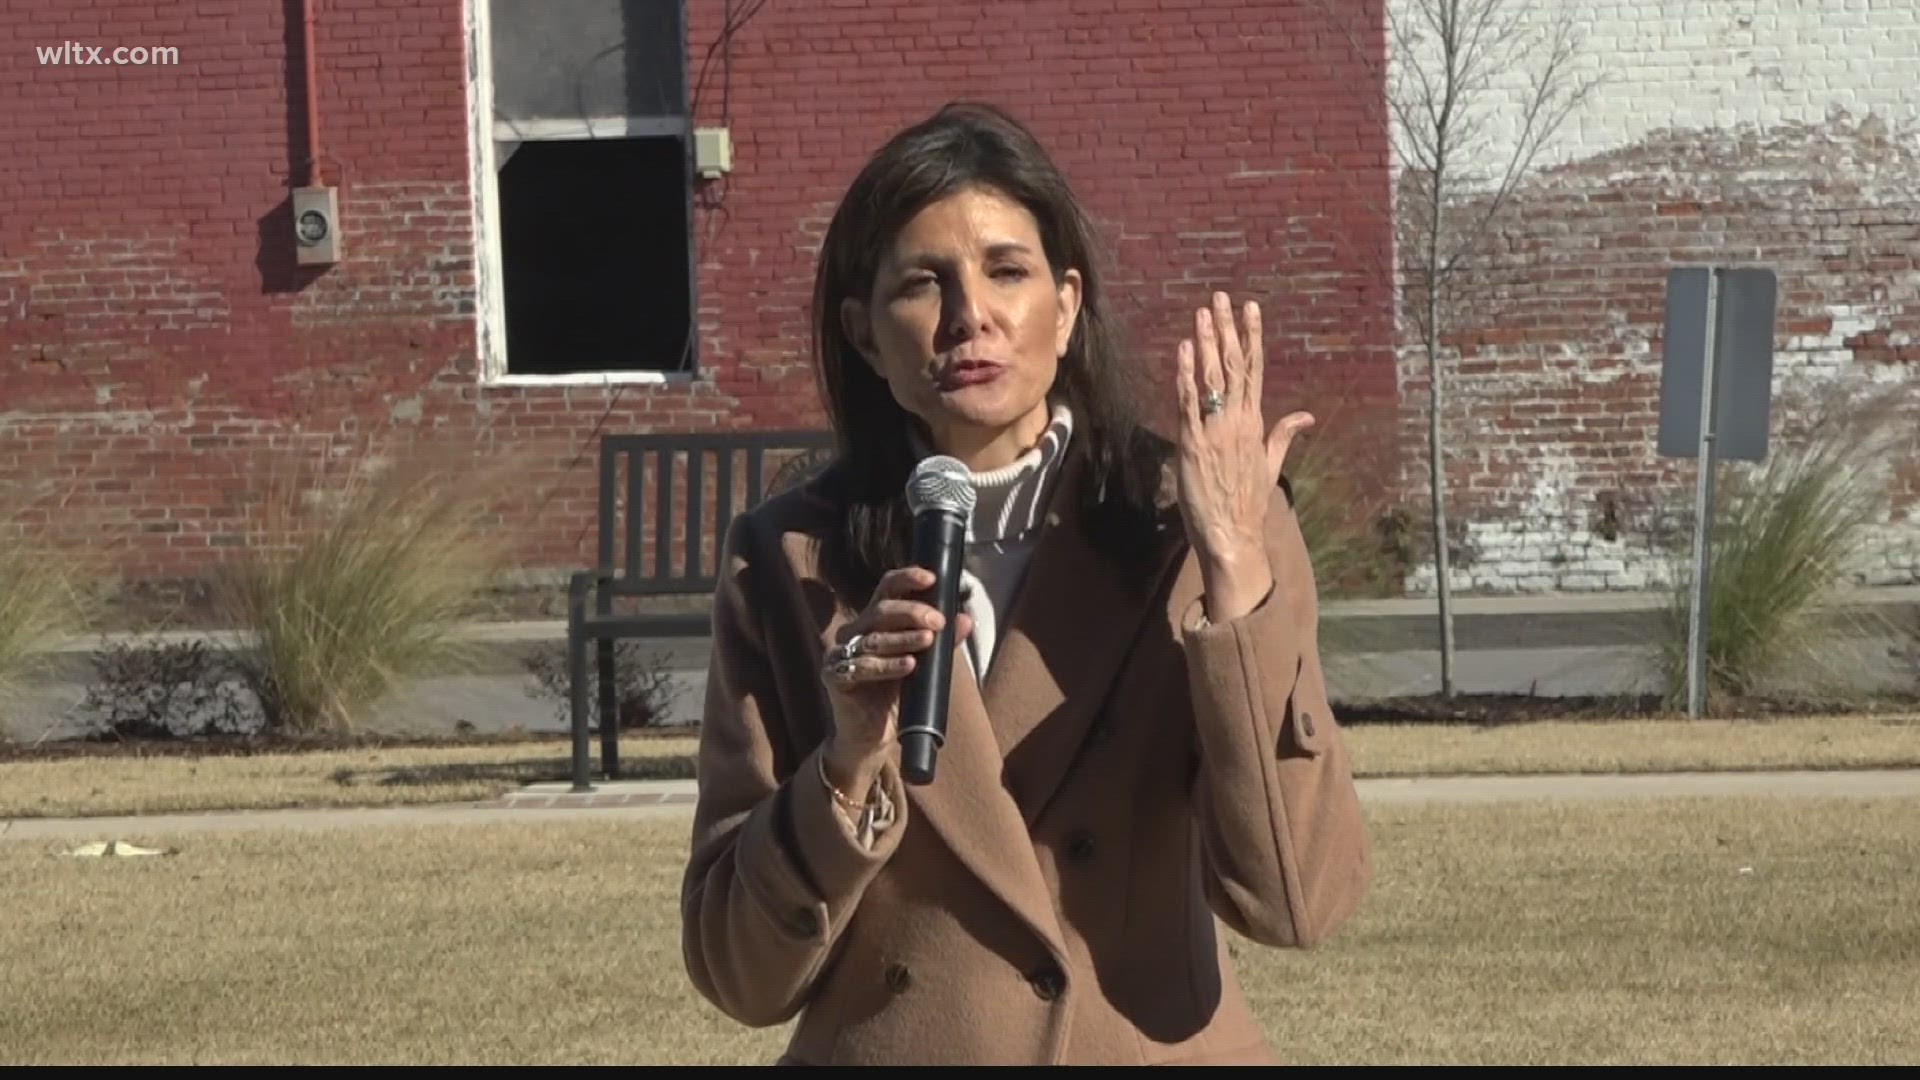 Republican Nikki Haley visited her hometown today to campaign for president.